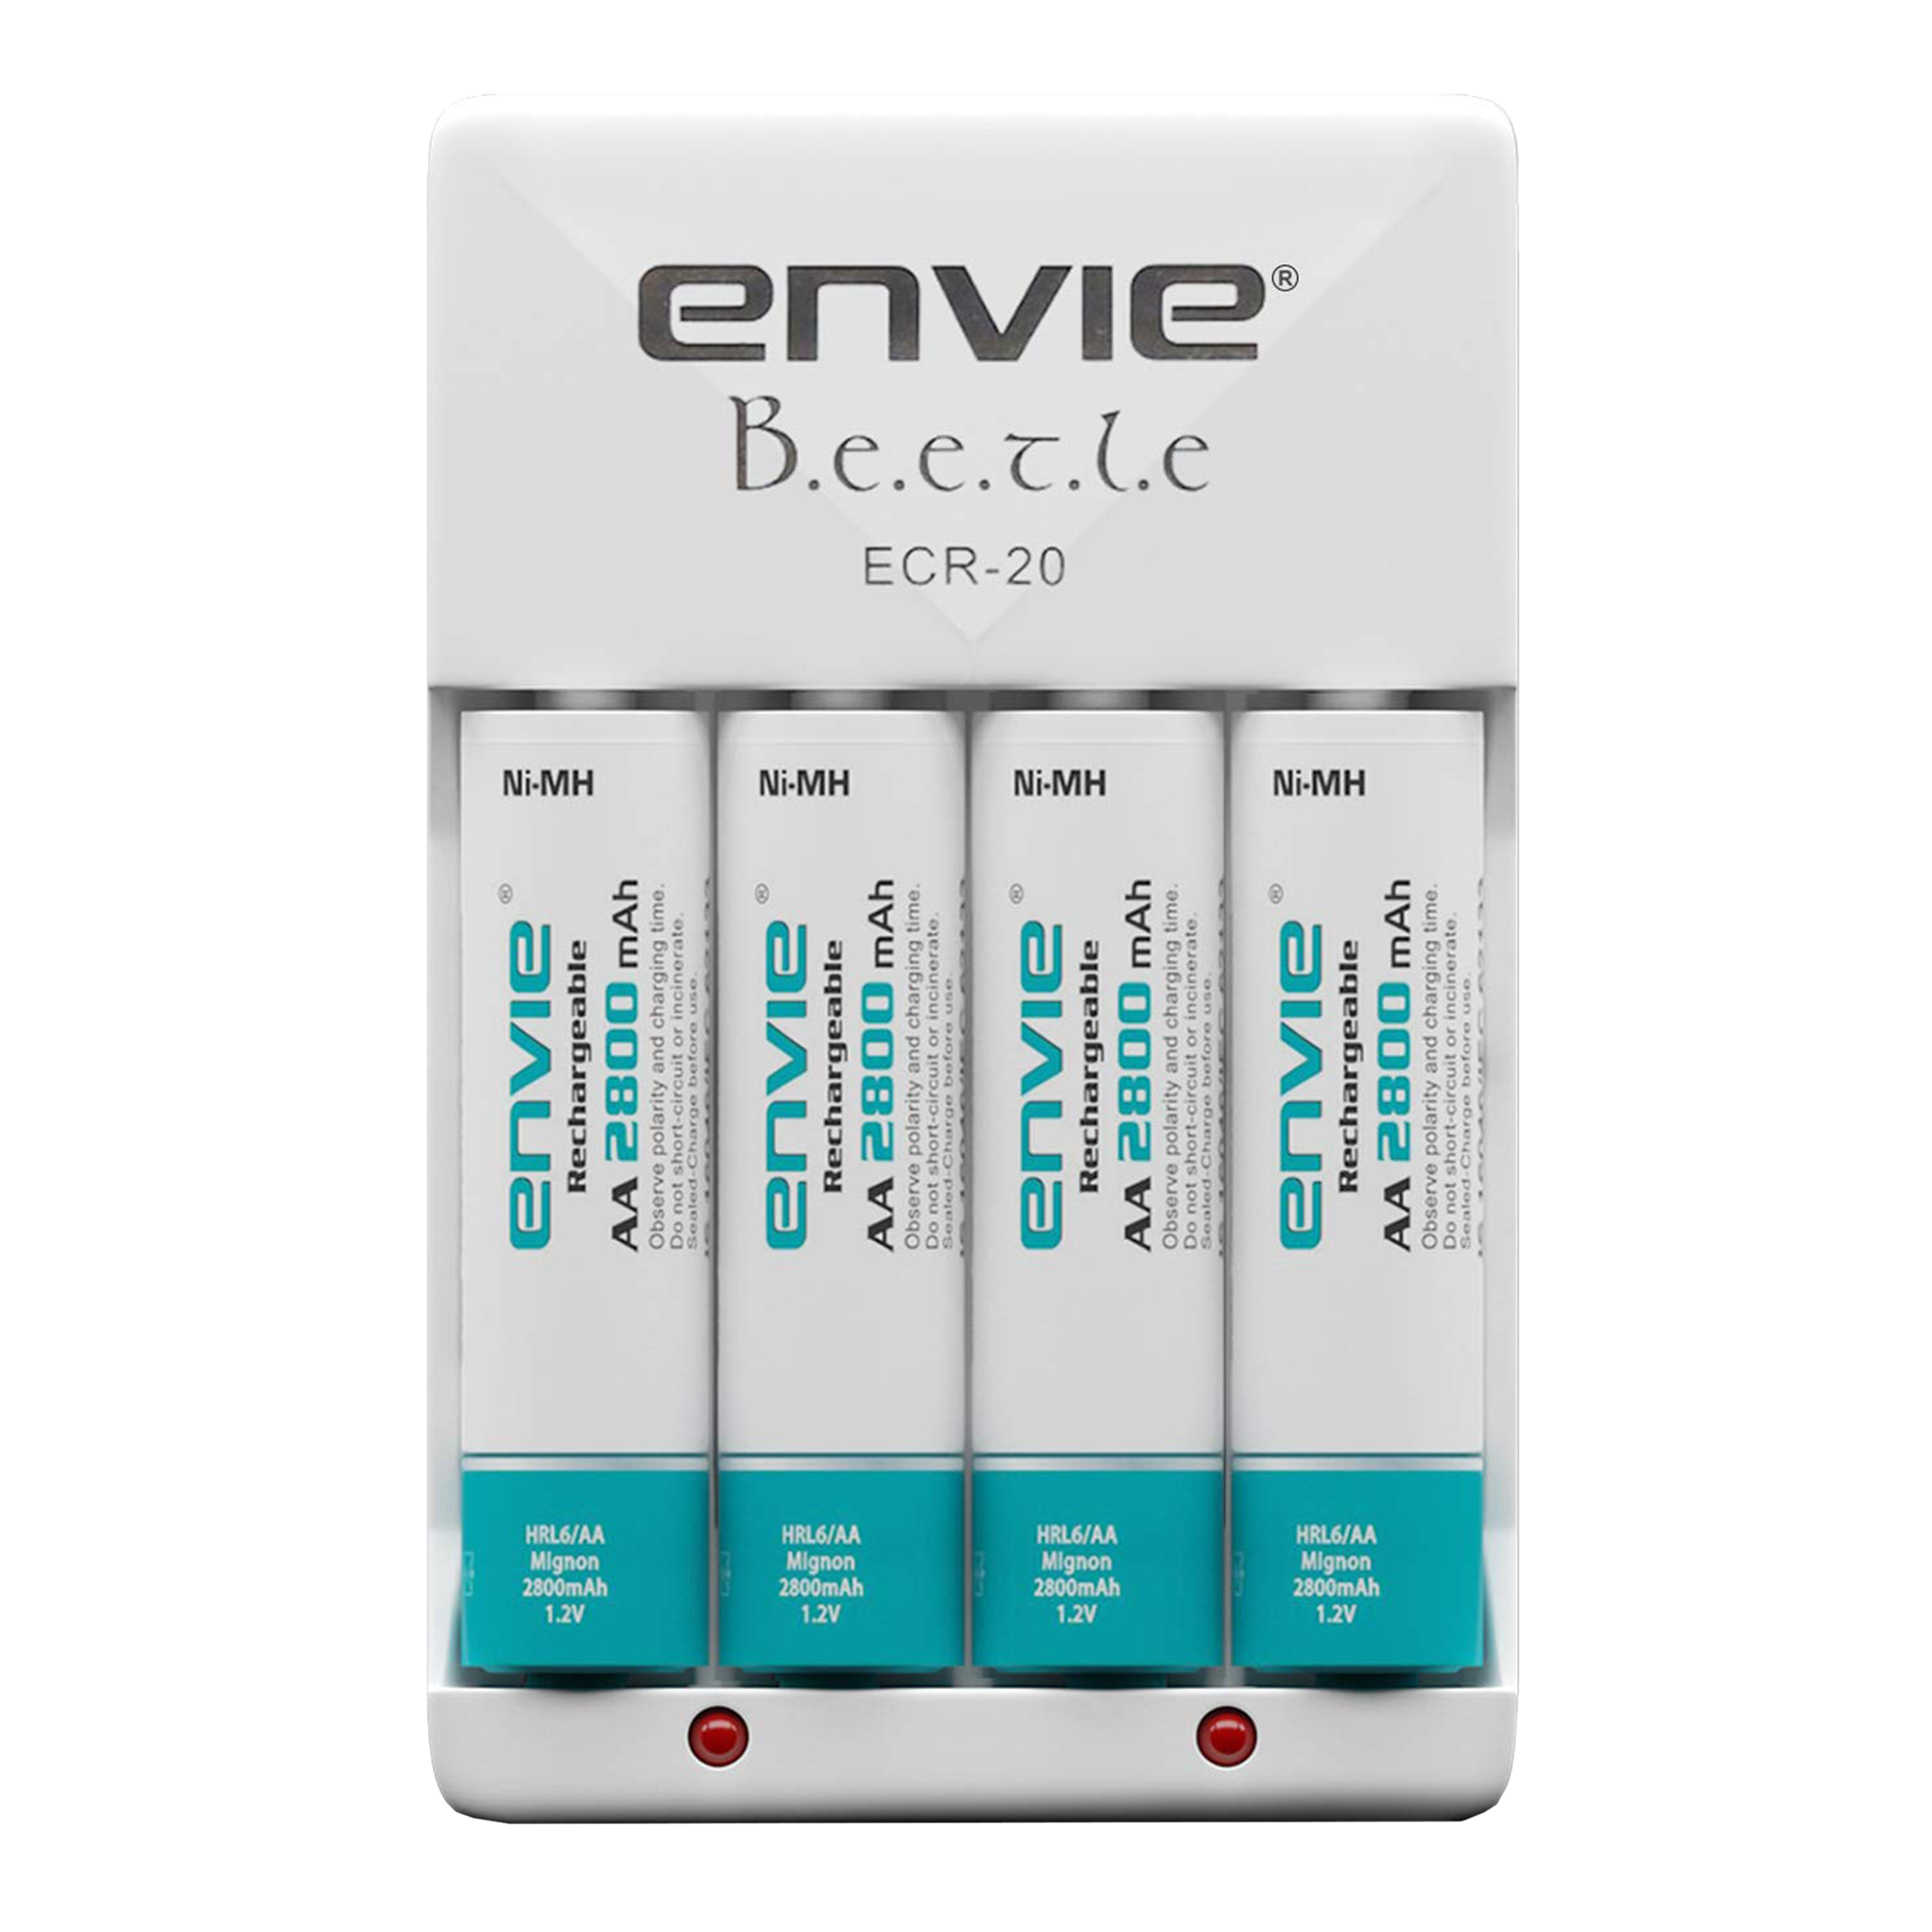 envie Beetle ECR-20 Quick Camera Battery Charger Combo for AA28004PL (4-Ports, Short Circuit Protection)